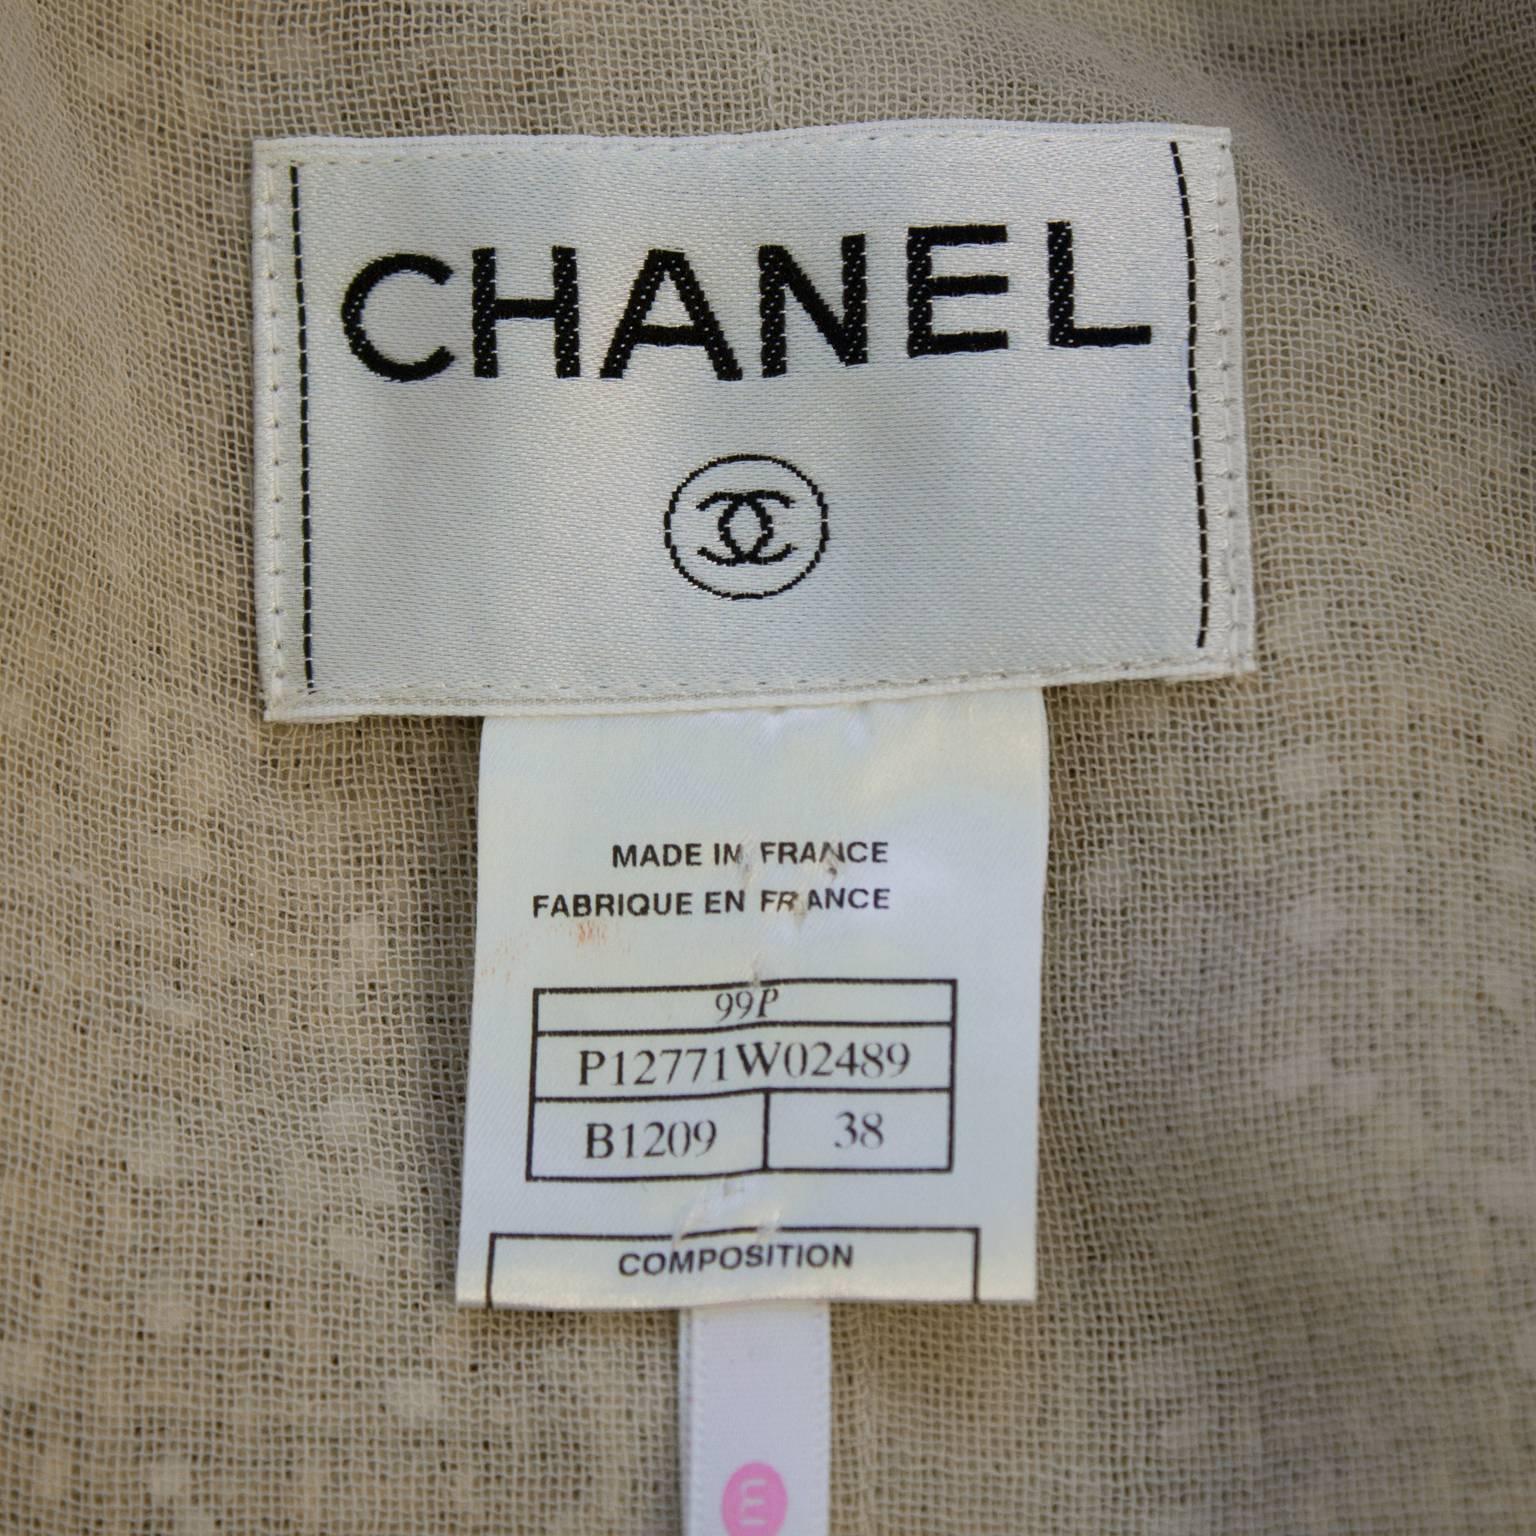 1999 Chanel boucle dinner suit trimmed in blush freshwater pearls along the cuffs, pockets, and edge of jacket. Finished with large single pearl buttons at the cuffs. The jacket has a hidden hook and eye closure at the collarbone. Lined in fine